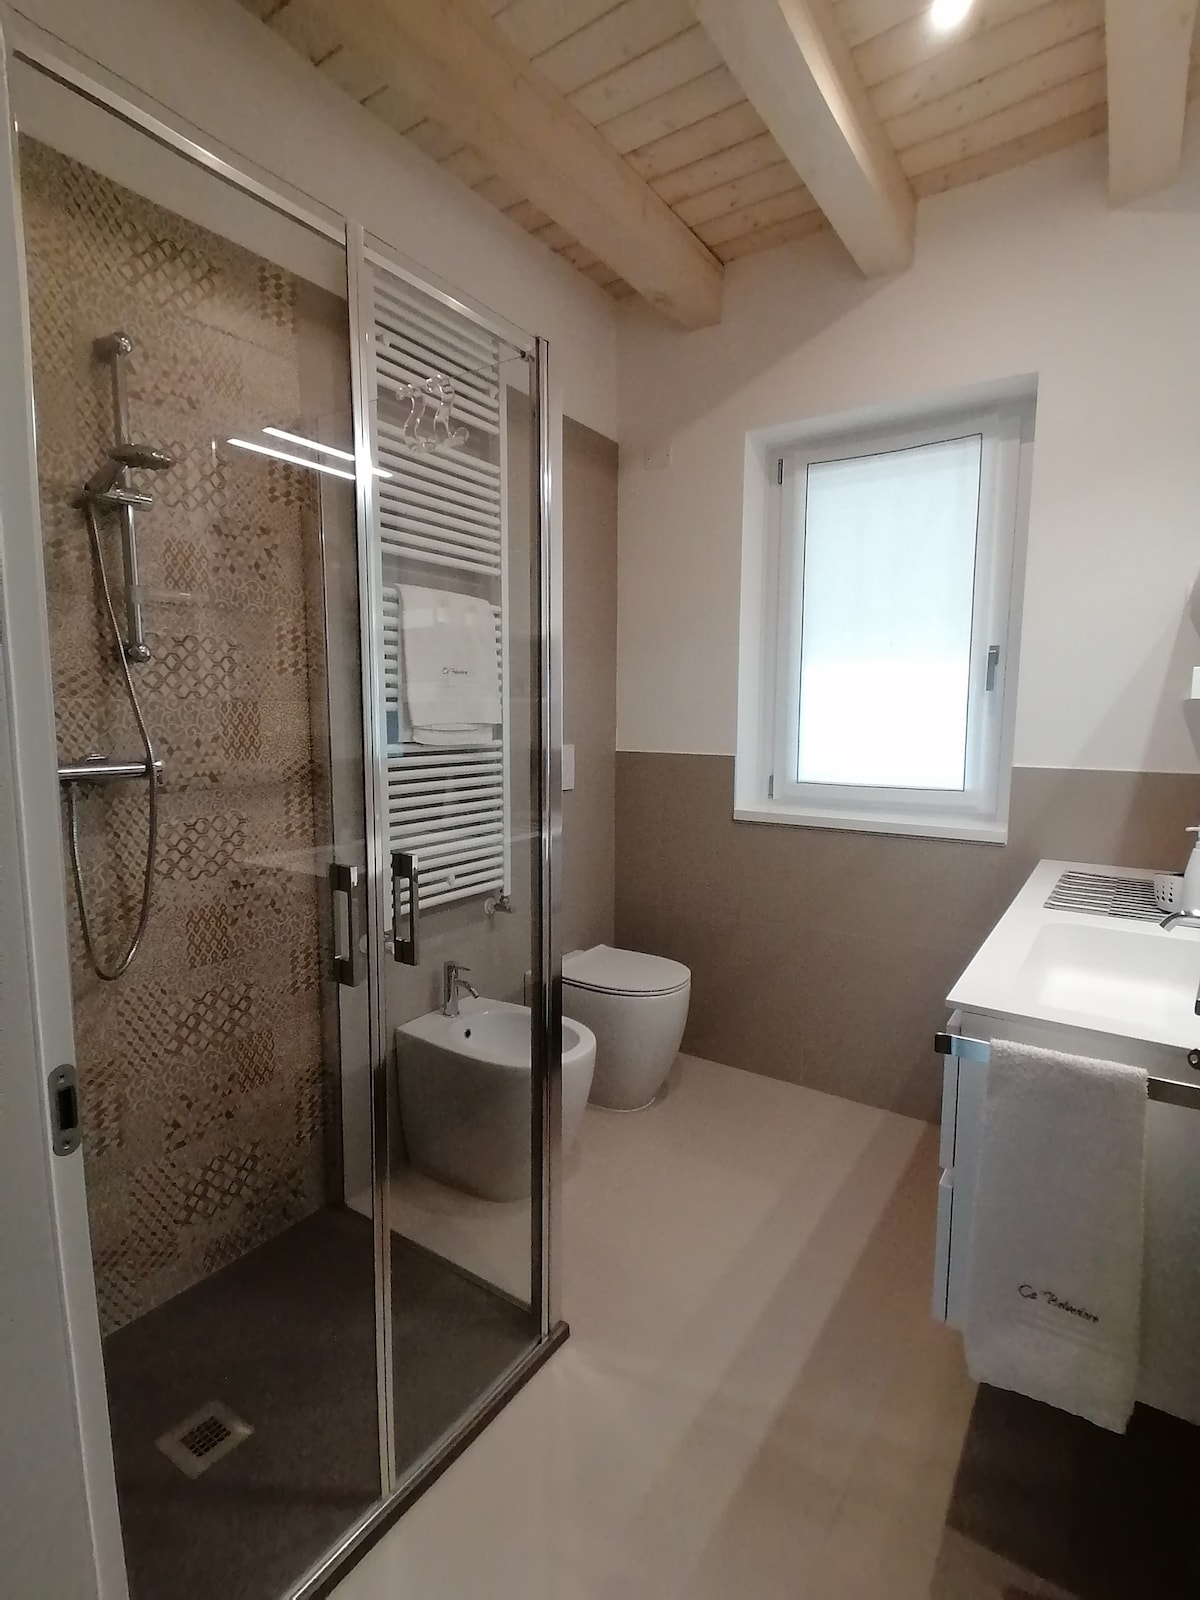 Apartment between Treviso and Venice